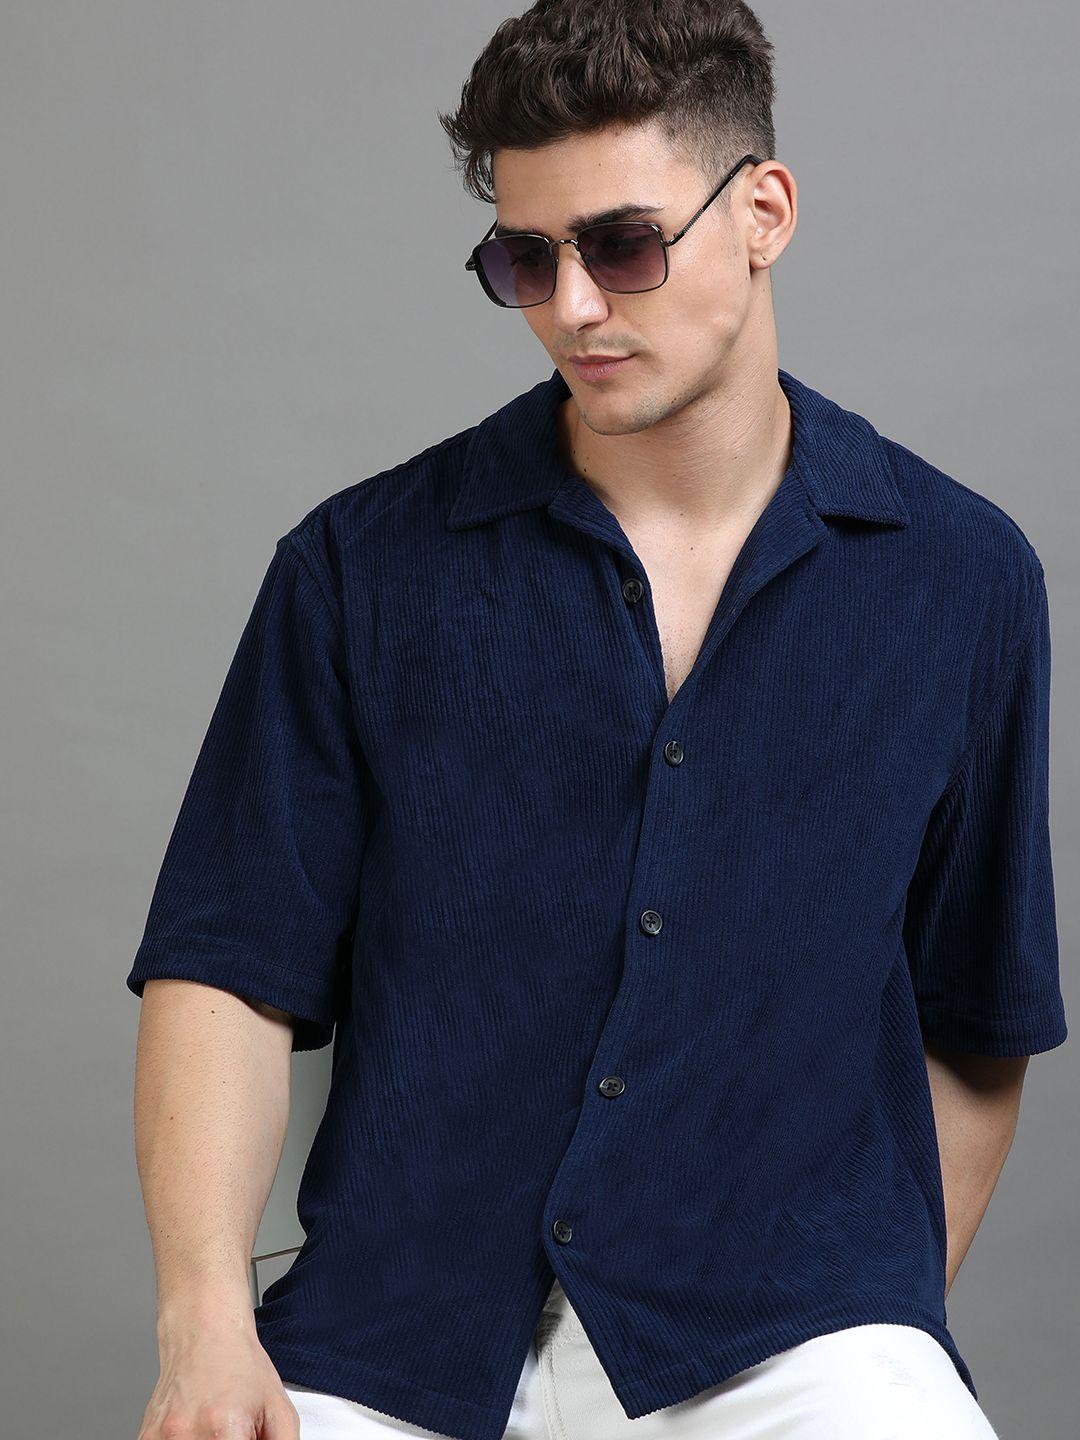 here&now oversized ribbed corduroy casual shirt